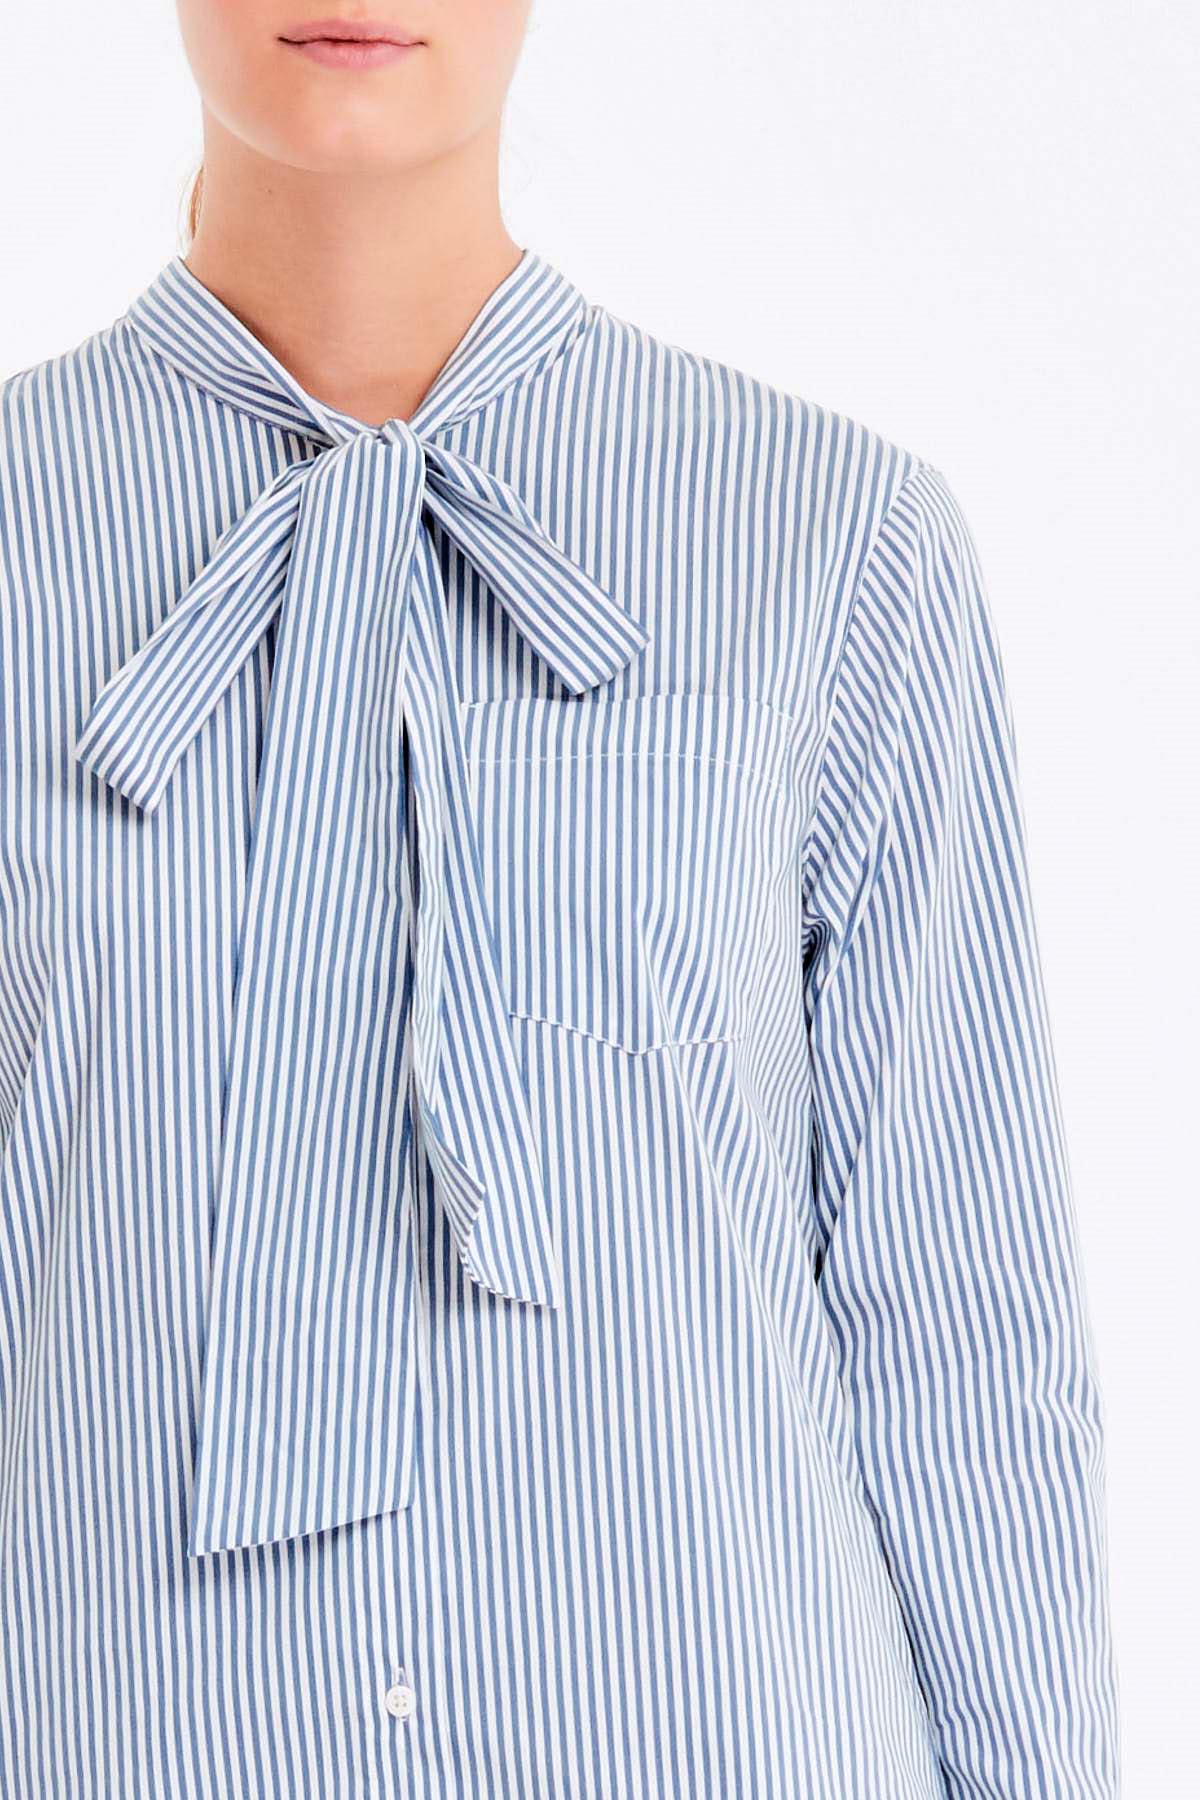 Striped shirt with a bow, photo 2